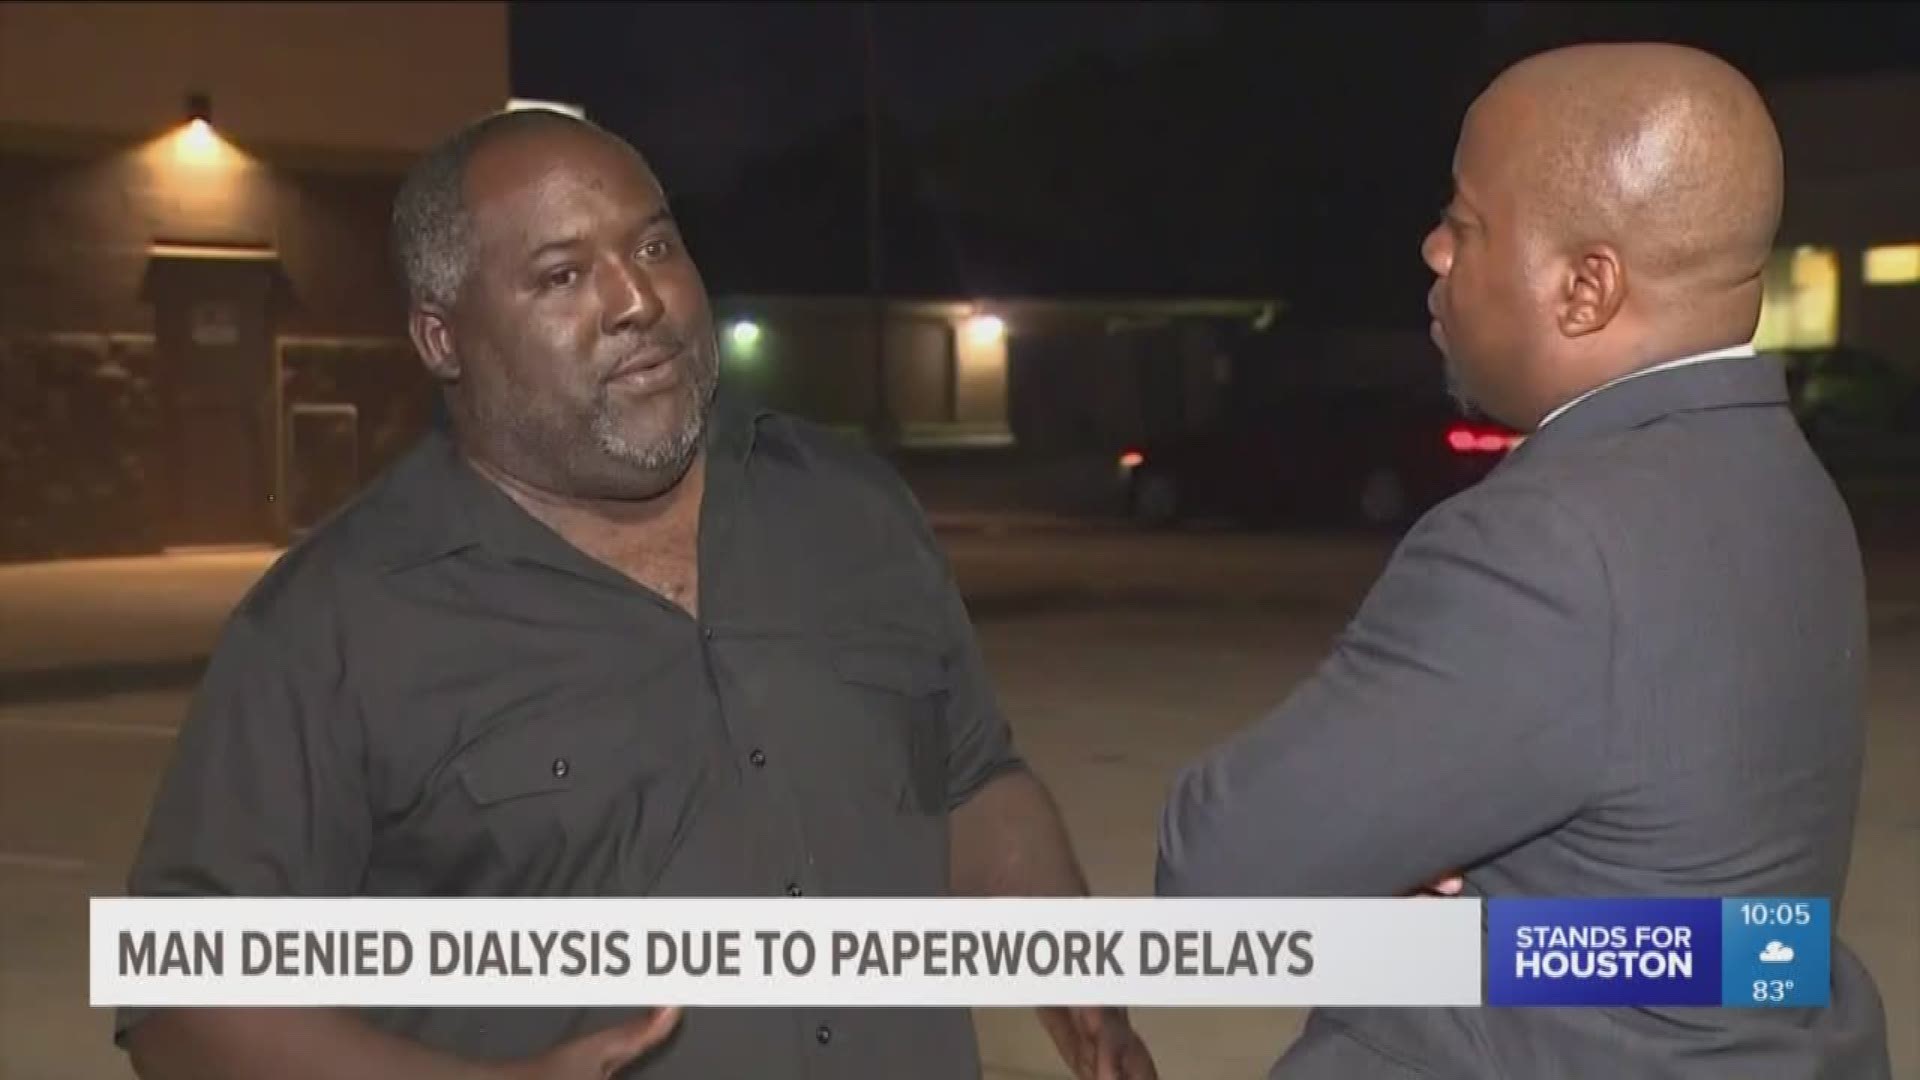 A dialysis patient who was about to lose his treatment reached out to KHOU 11 on Facebook for help. Reporter Larry Seward got involved and was able to get the patient the treatment he needed. 